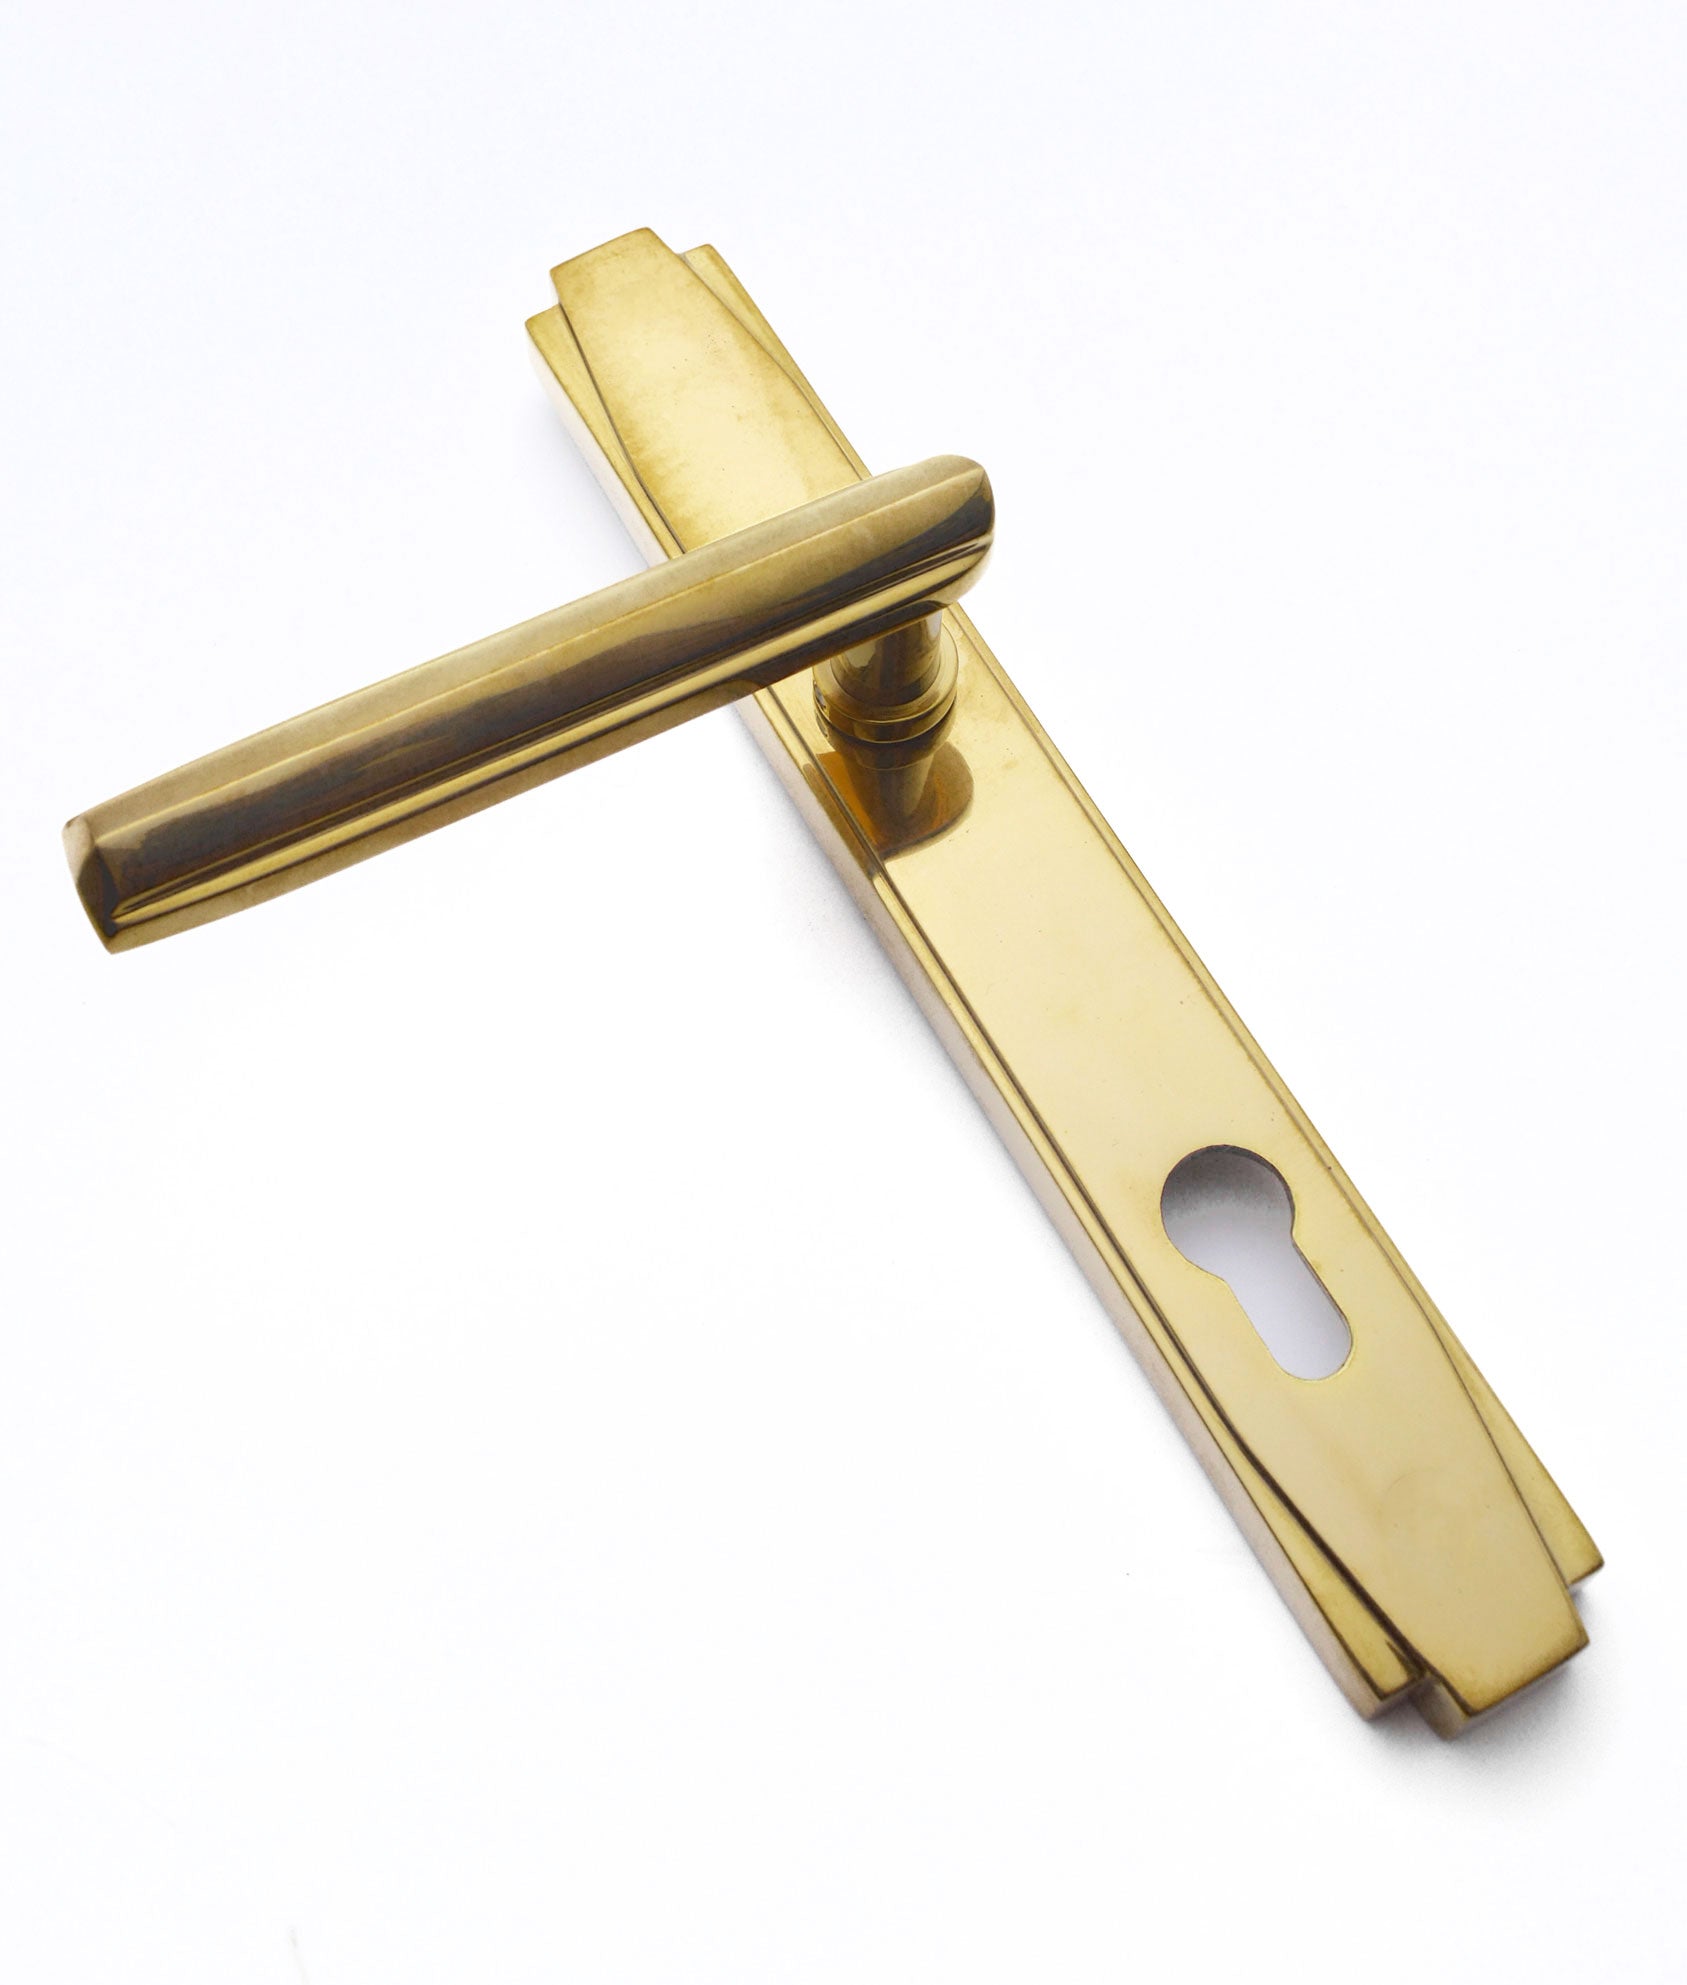 Barbier Lever Handle for Multipoint Lock